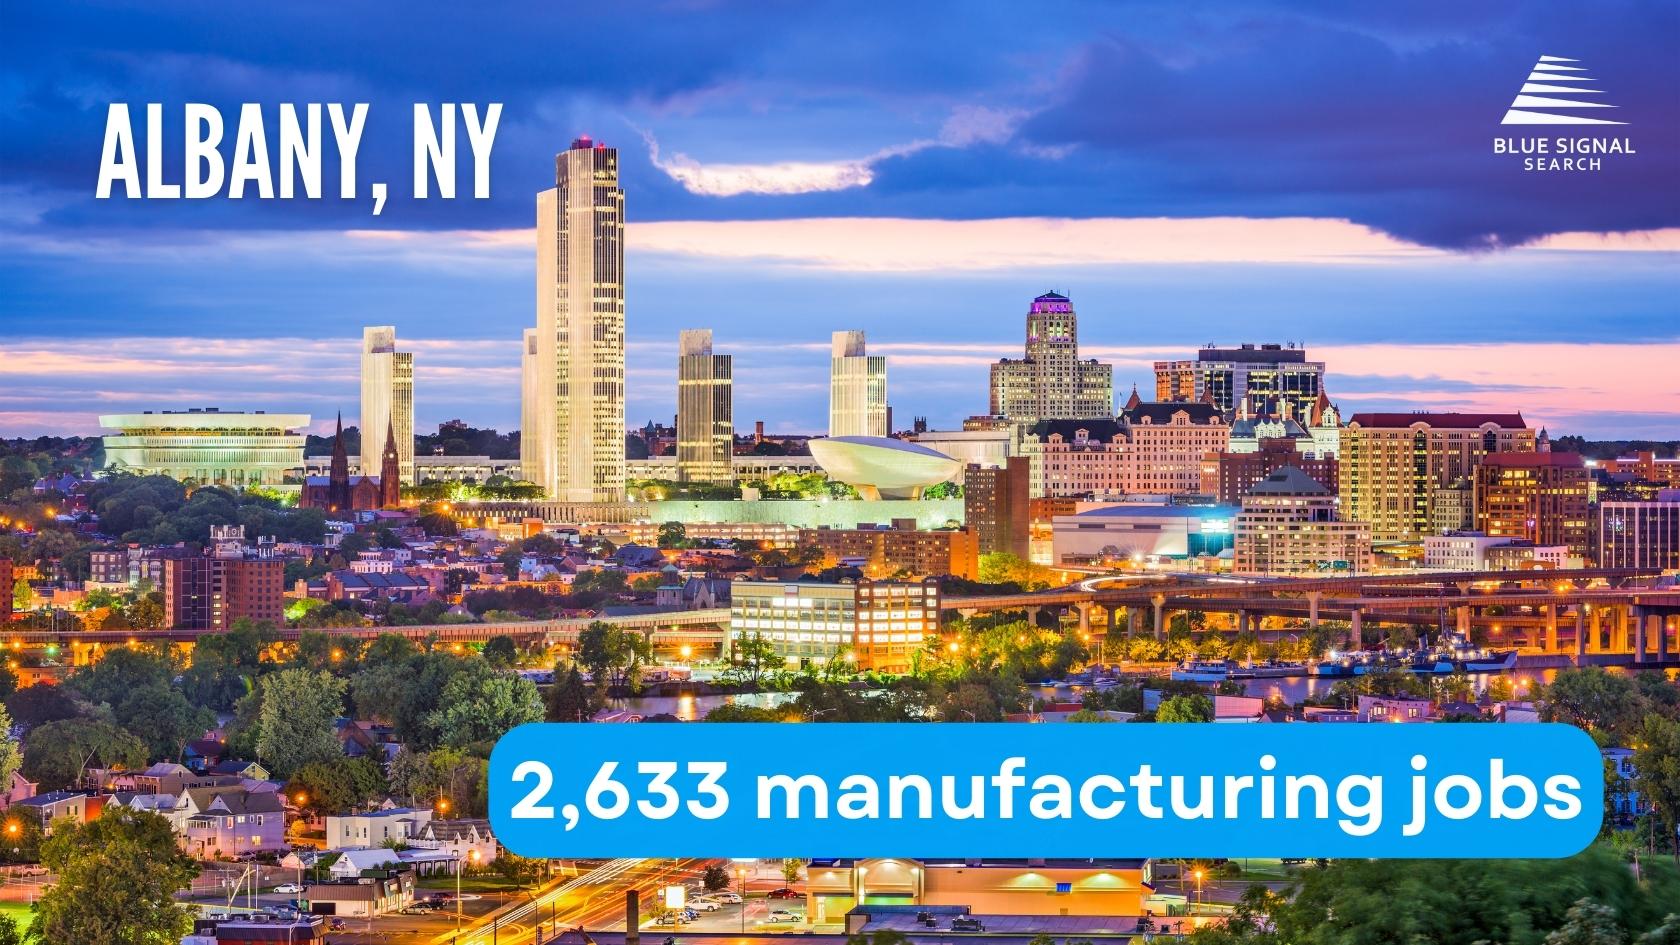 Skyline of Albany, NY with key manufacturing statistics highlighted.